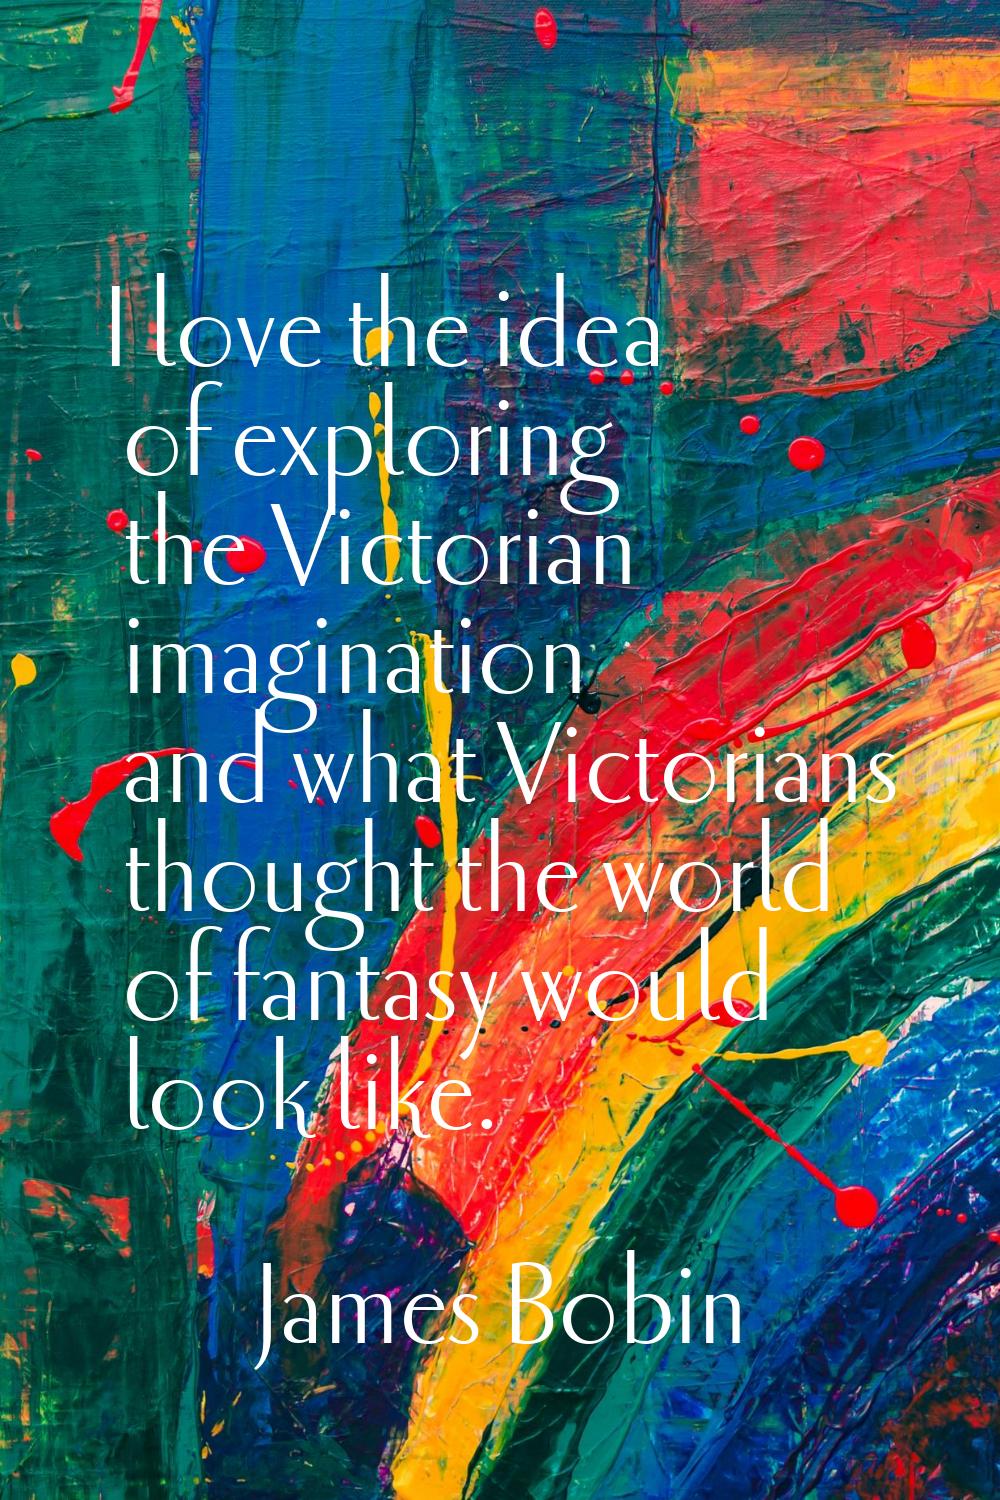 I love the idea of exploring the Victorian imagination and what Victorians thought the world of fan